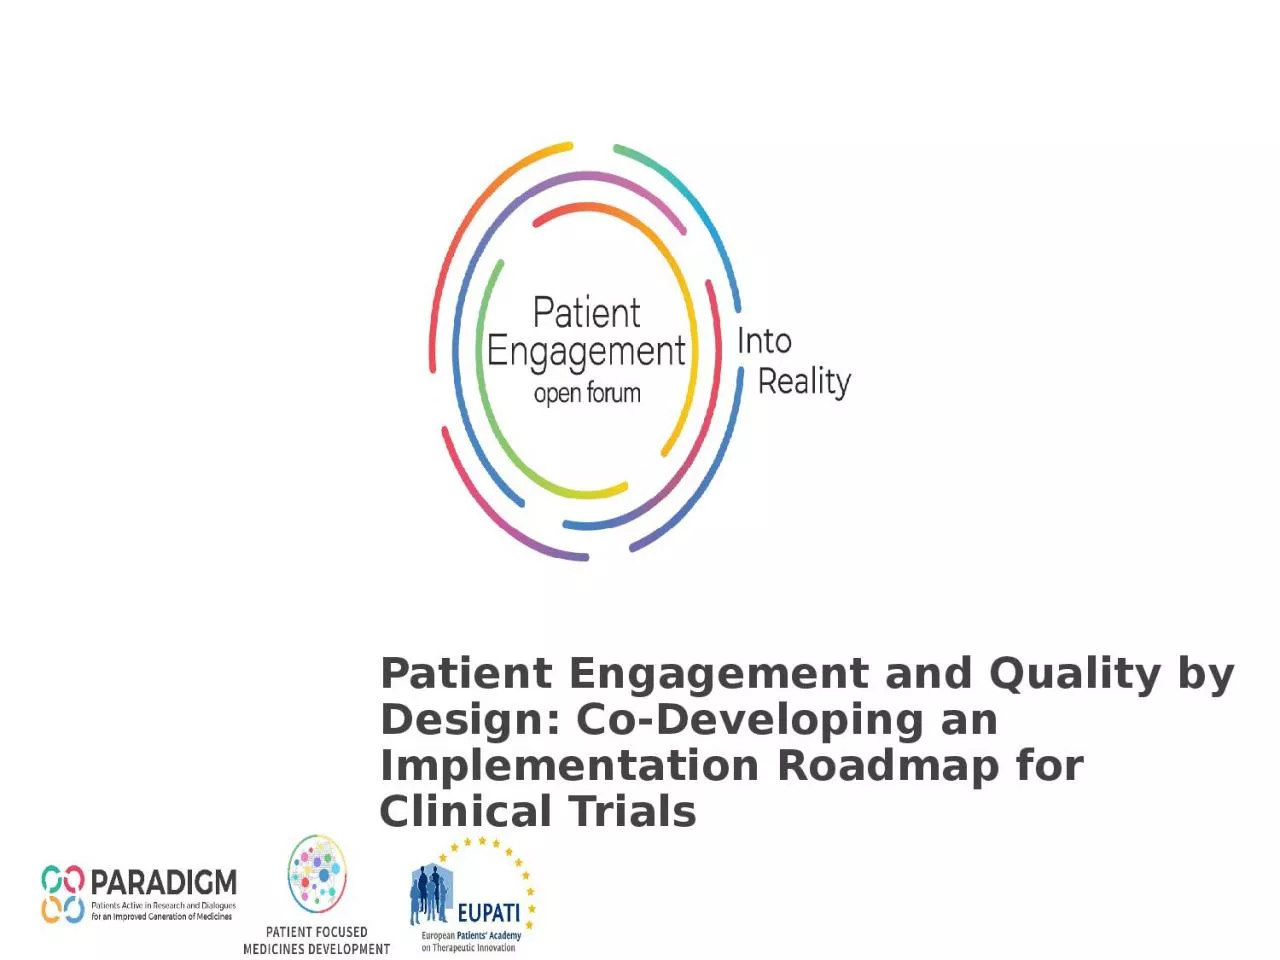 Patient Engagement and Quality by Design: Co-Developing an Implementation Roadmap for